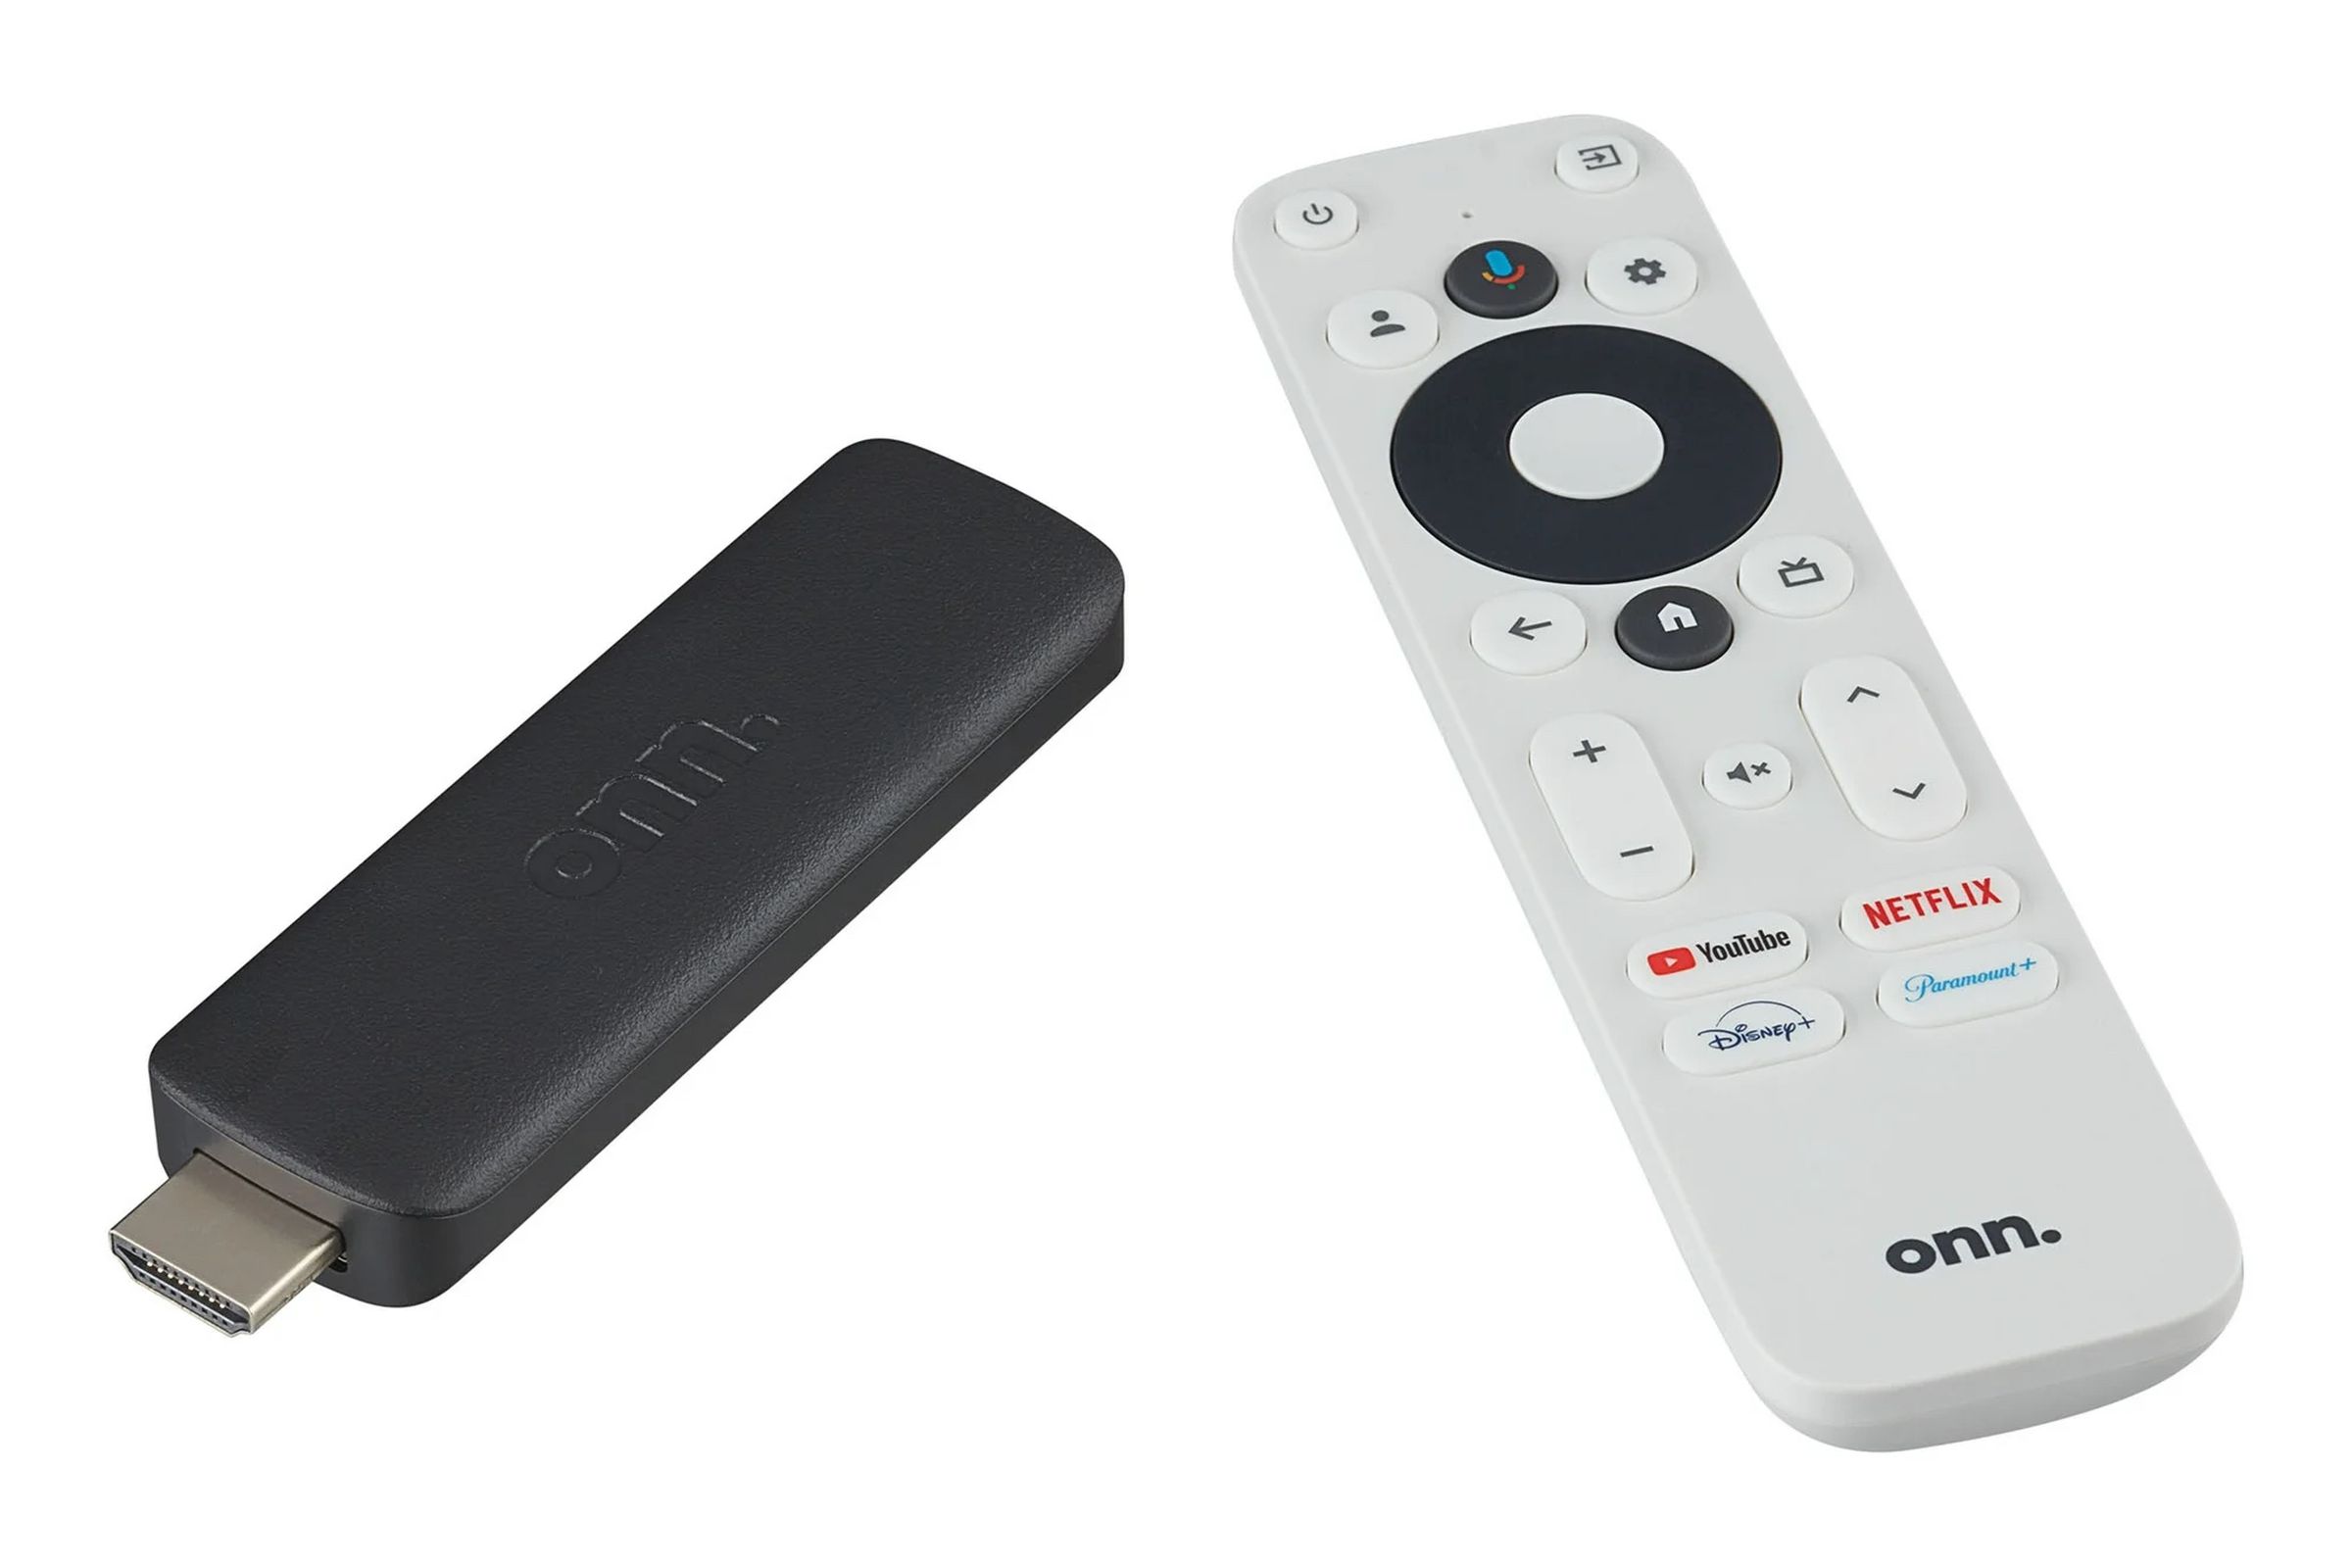 A black streaming stick and a white remote control